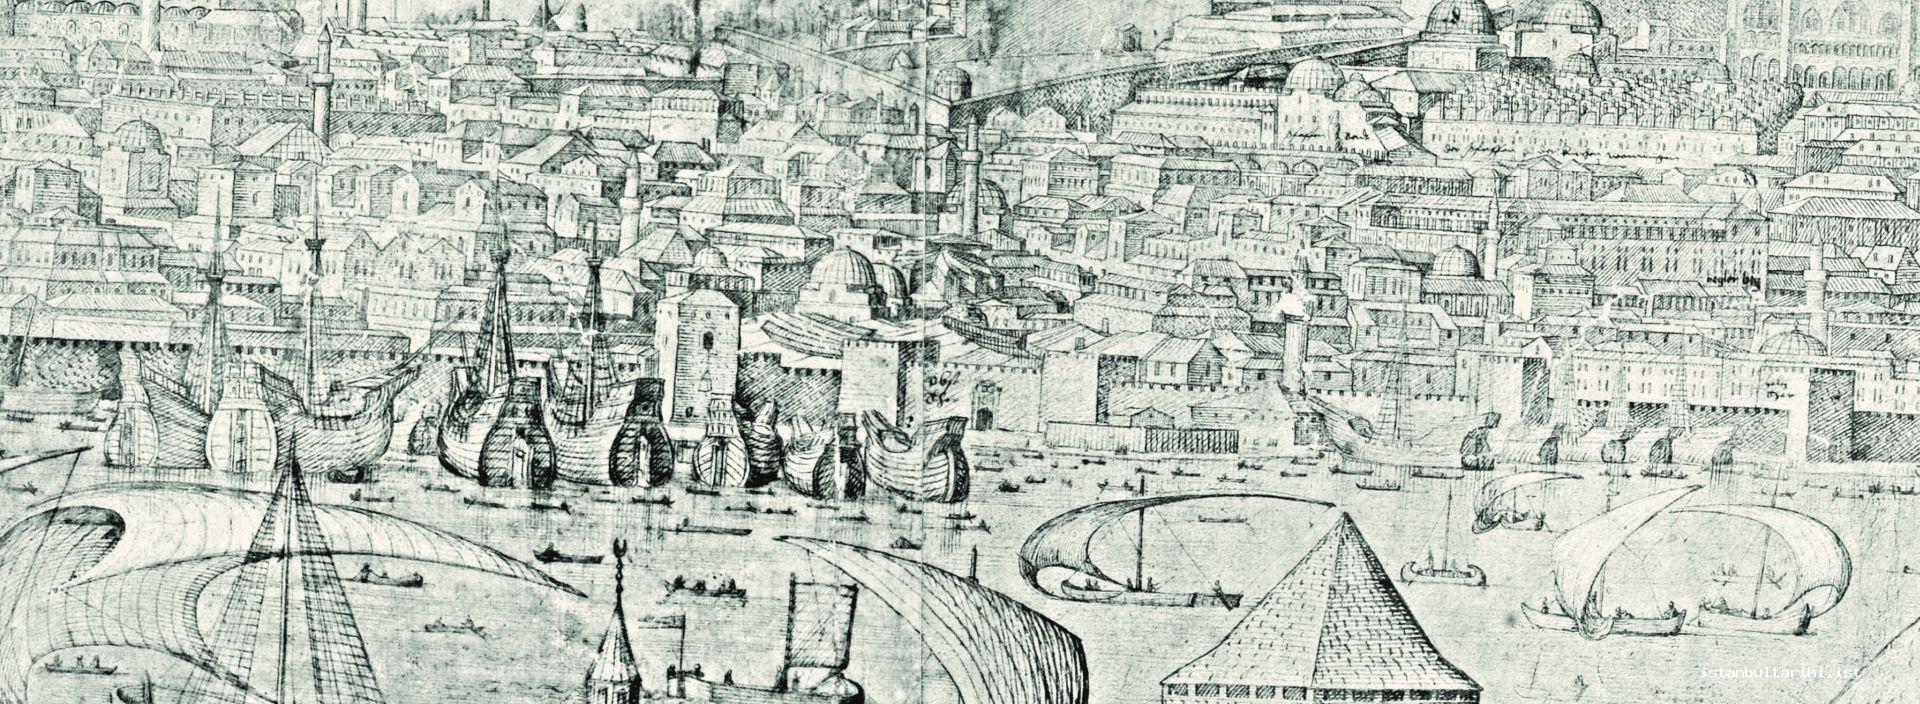 17- The view of Tahtakale from the Golden Horn (details from Lorichs)